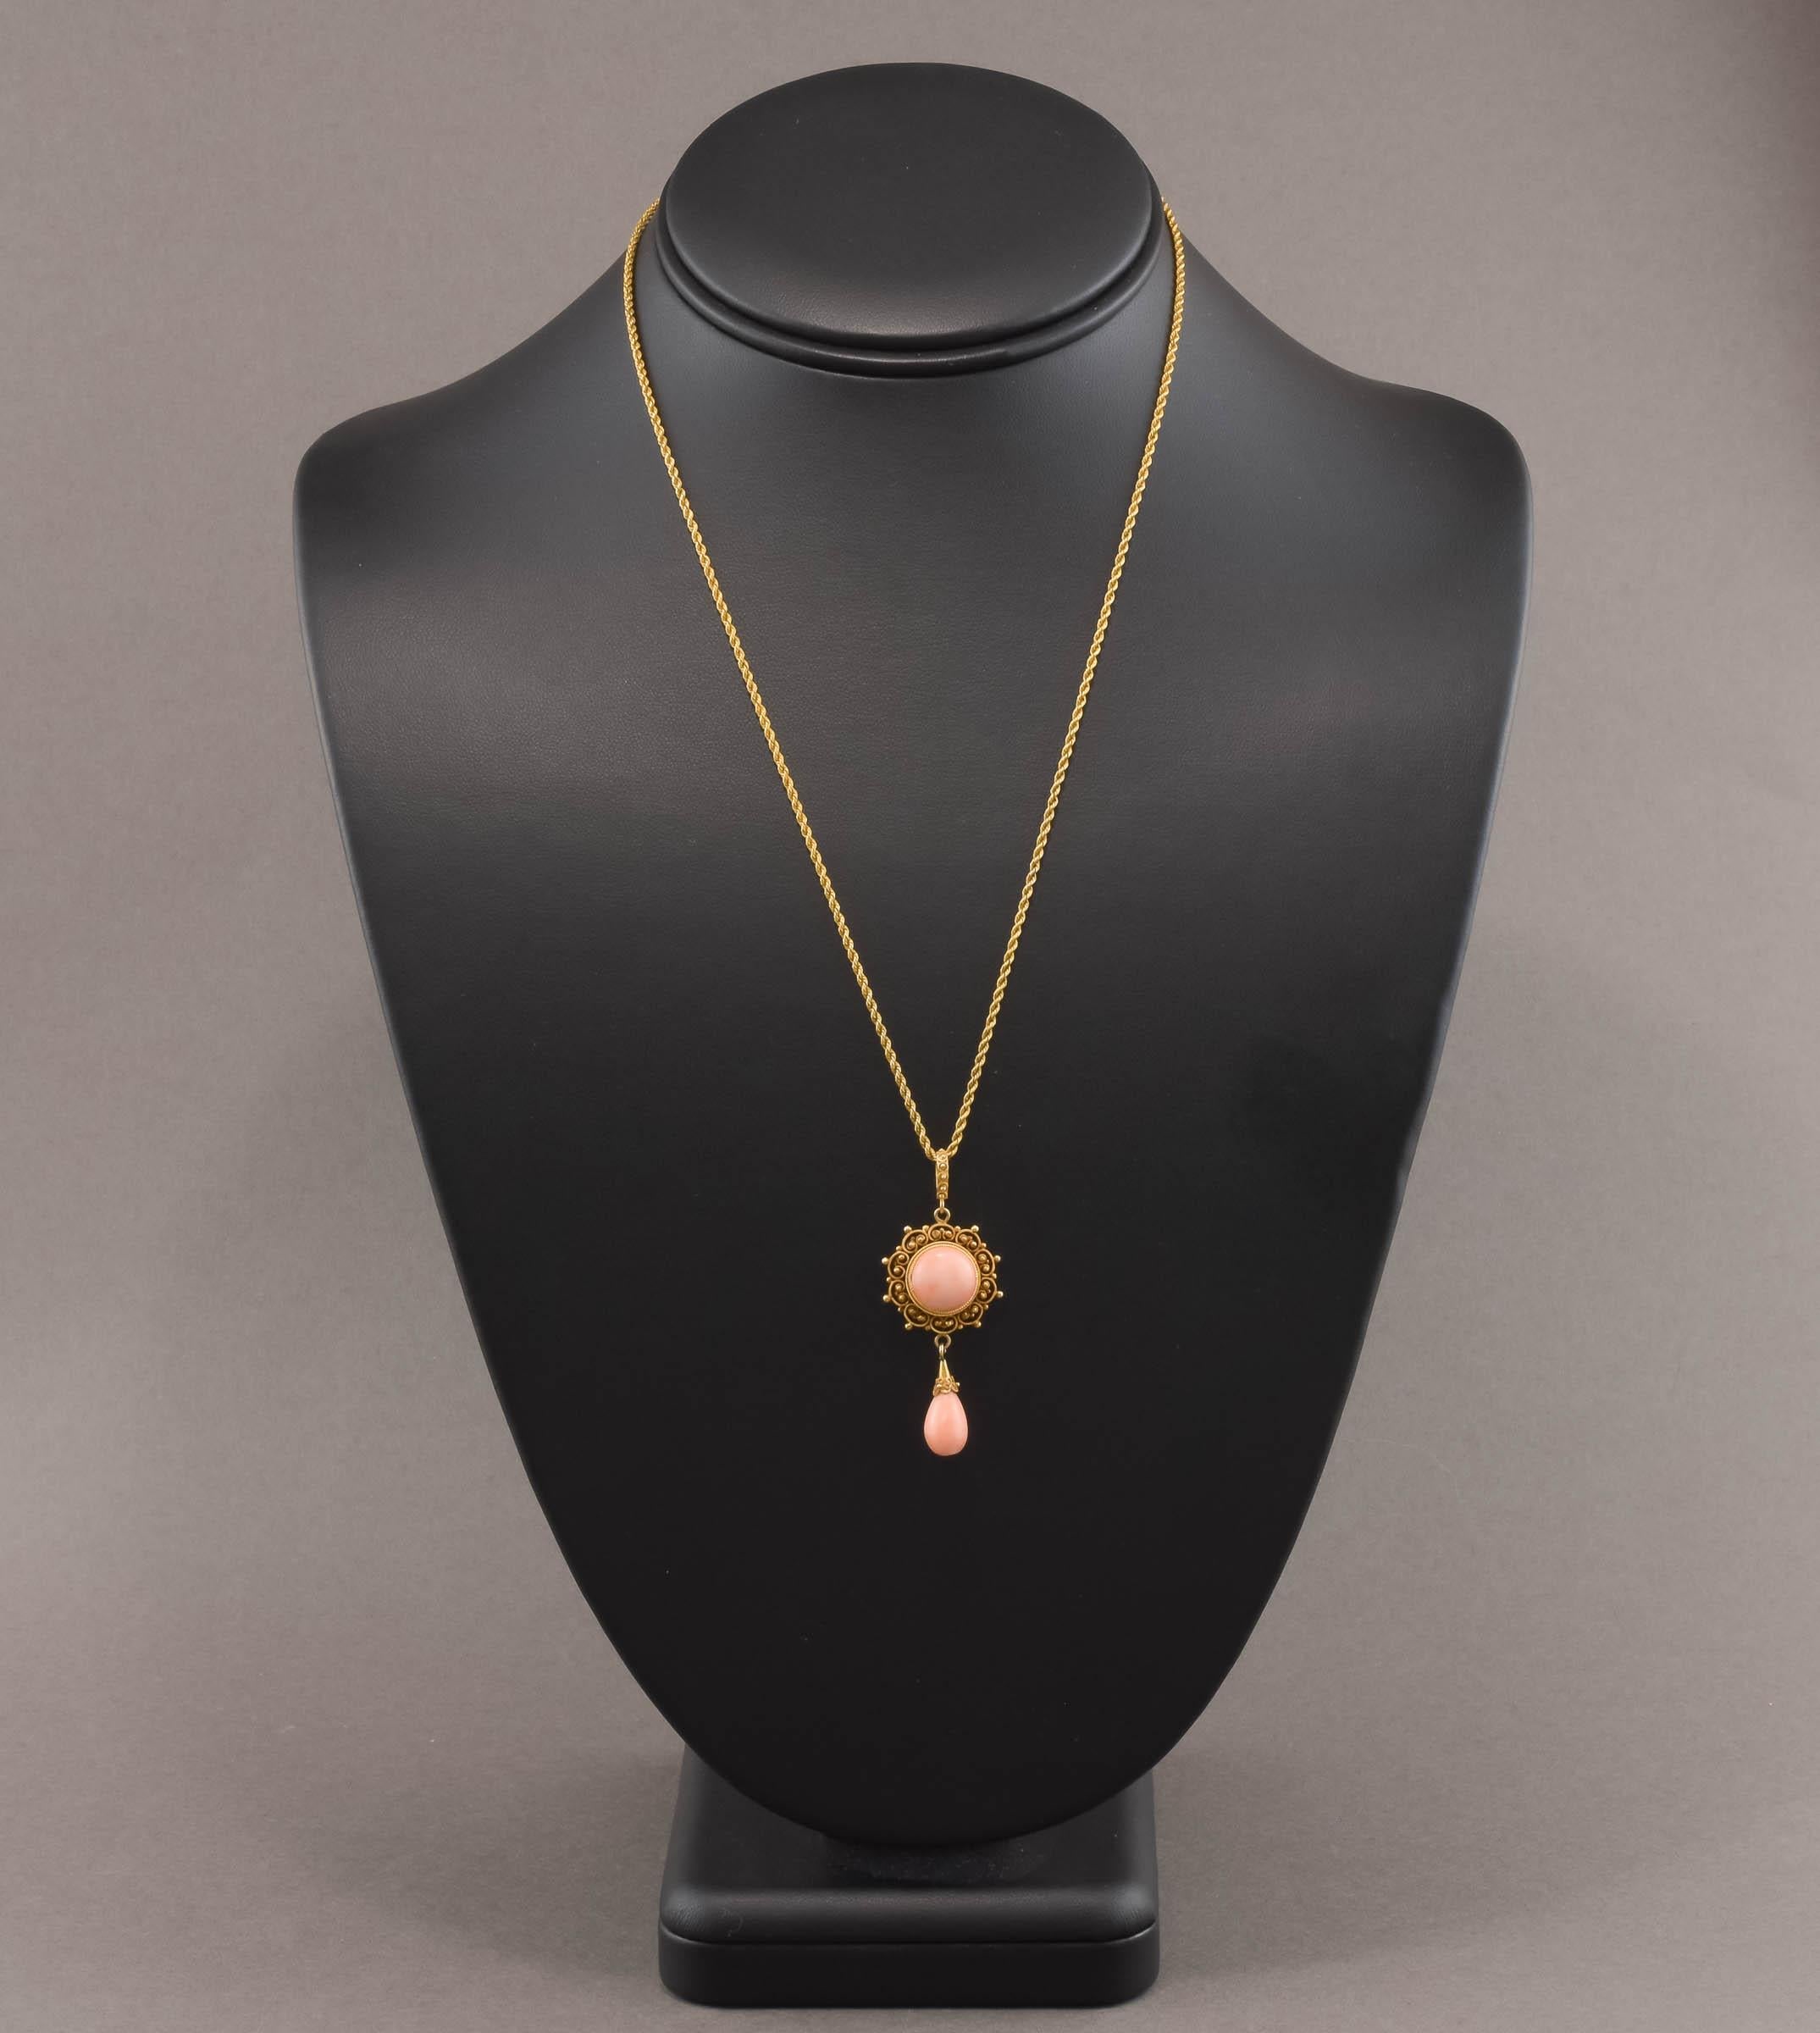 Antique Victorian Etruscan Revival 14K Gold Angel Skin Coral Necklace In Good Condition For Sale In Danvers, MA